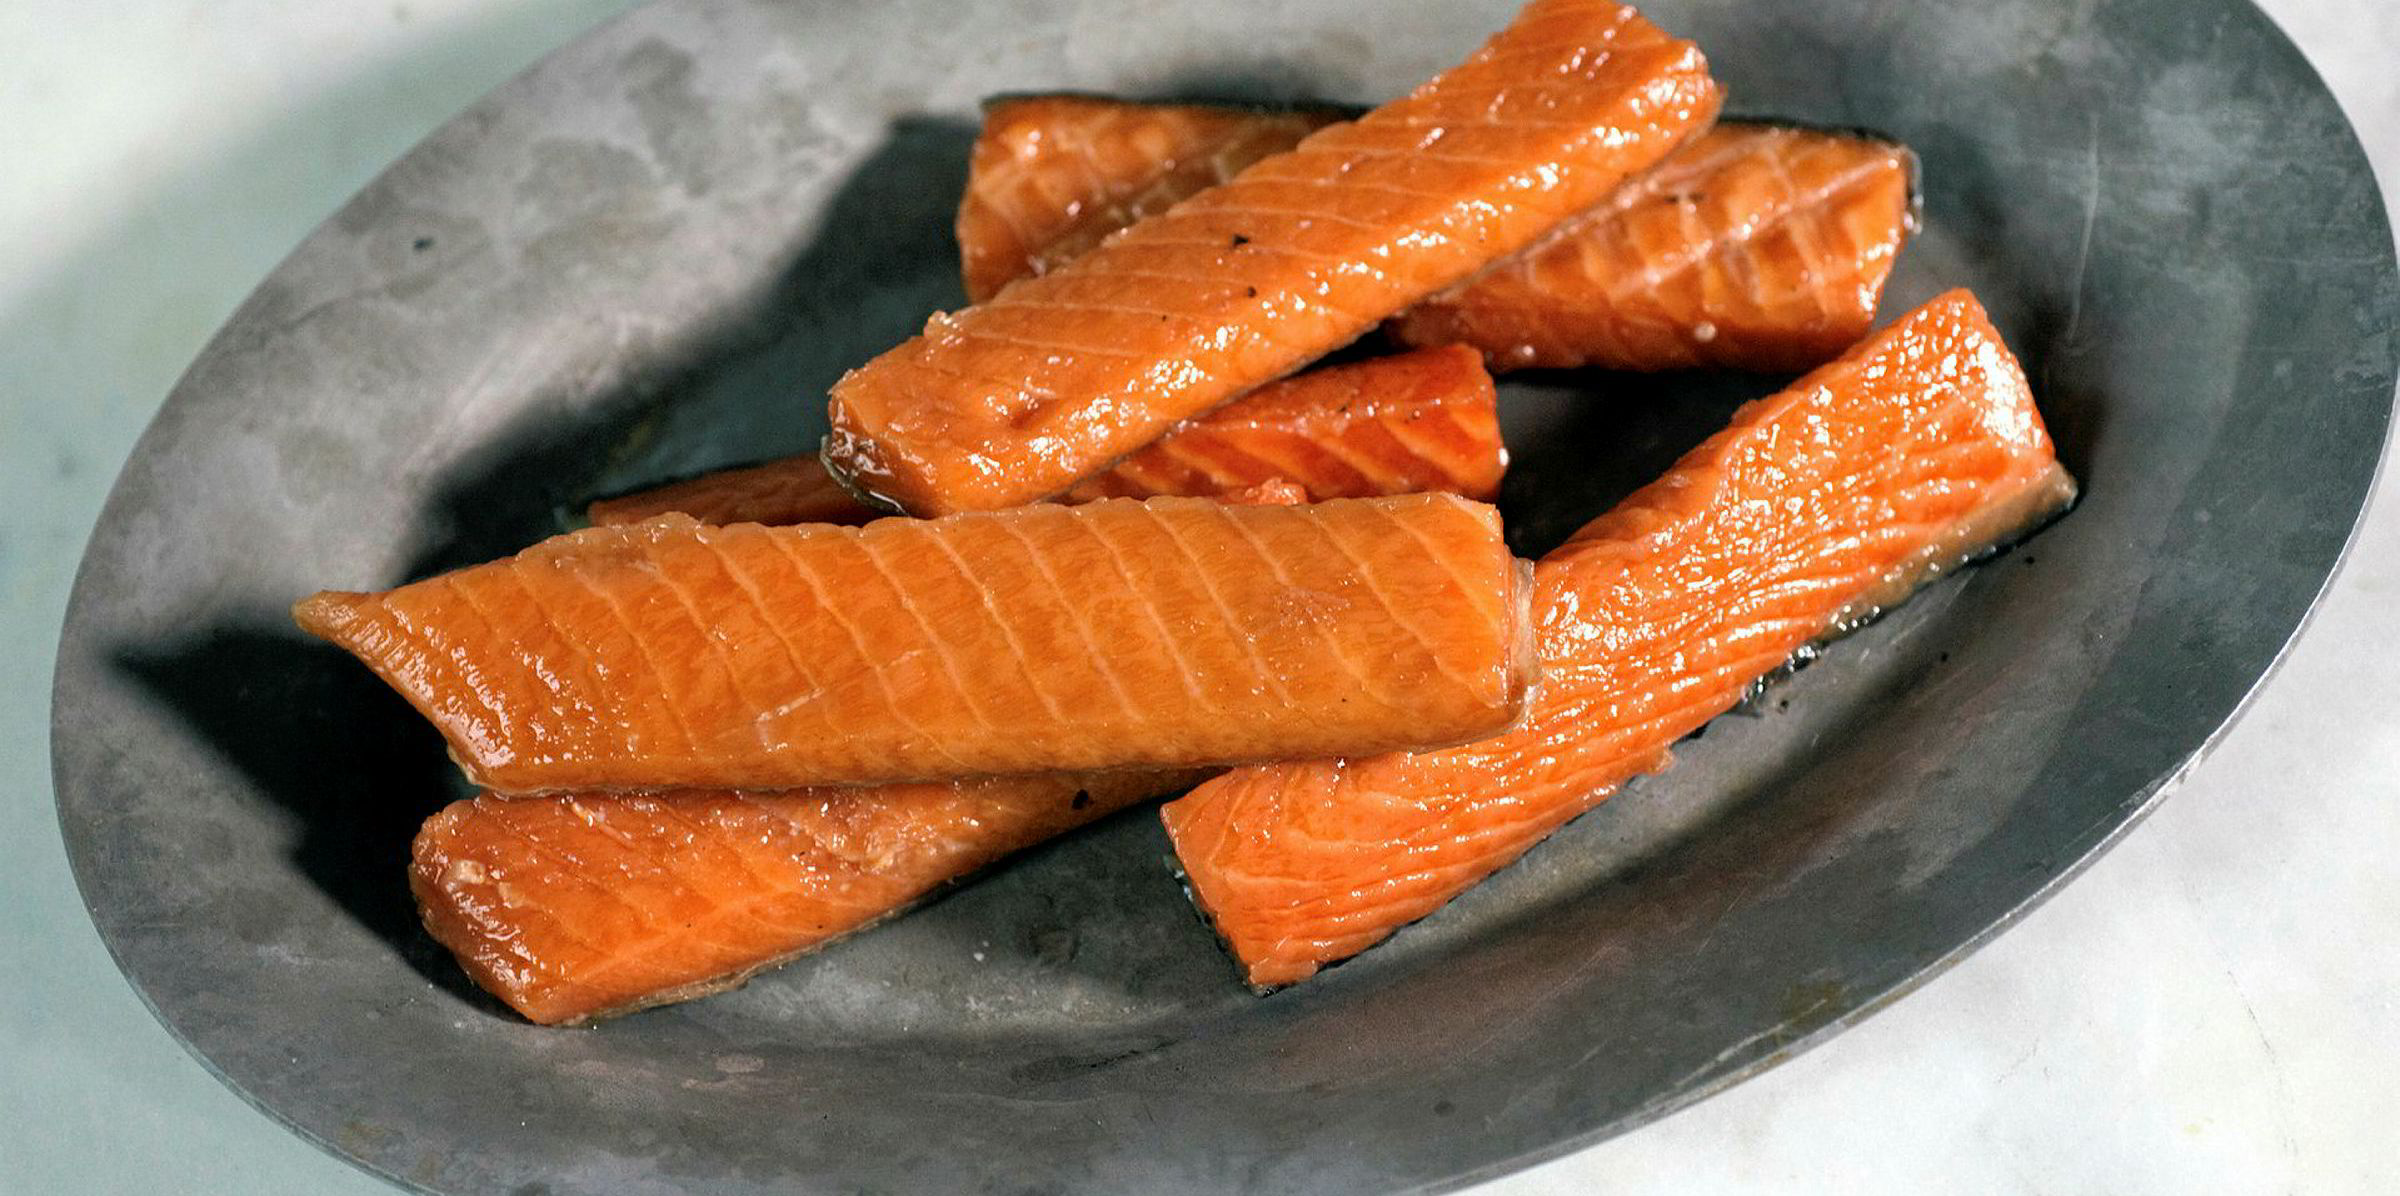 Acme unveils branded smoked salmon candy in new US stores